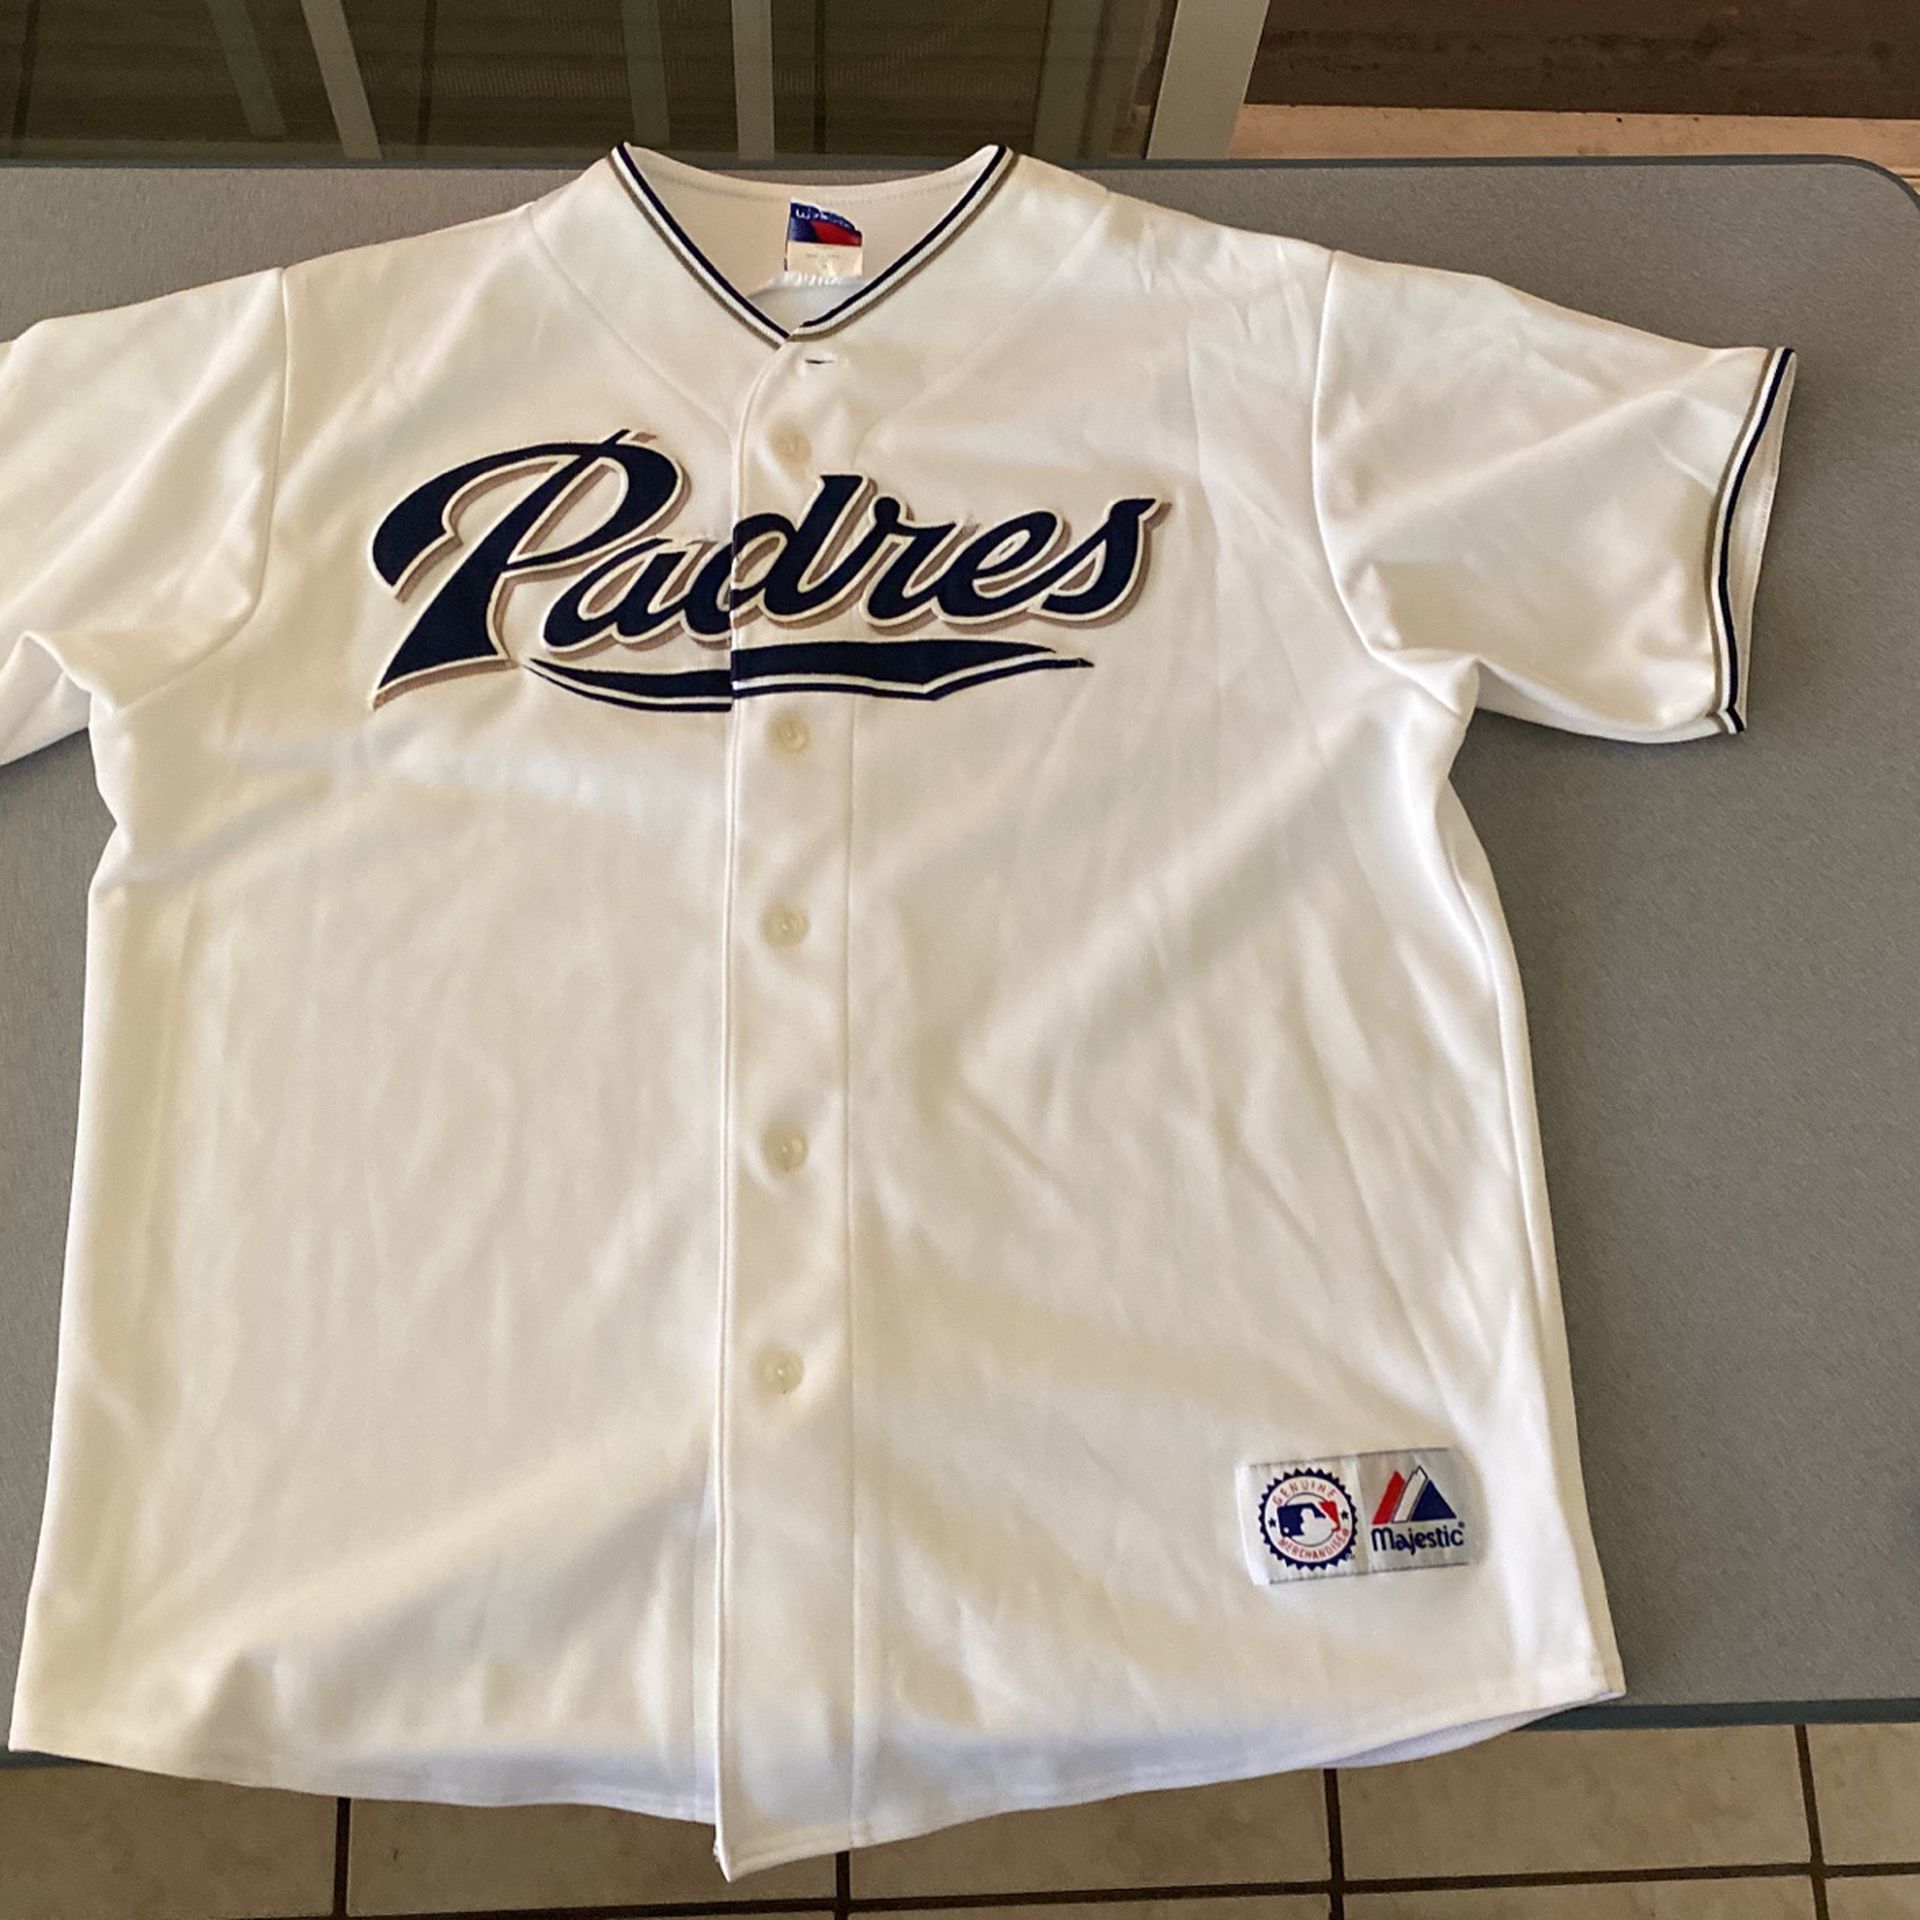 Classic San Diego Padres jersey